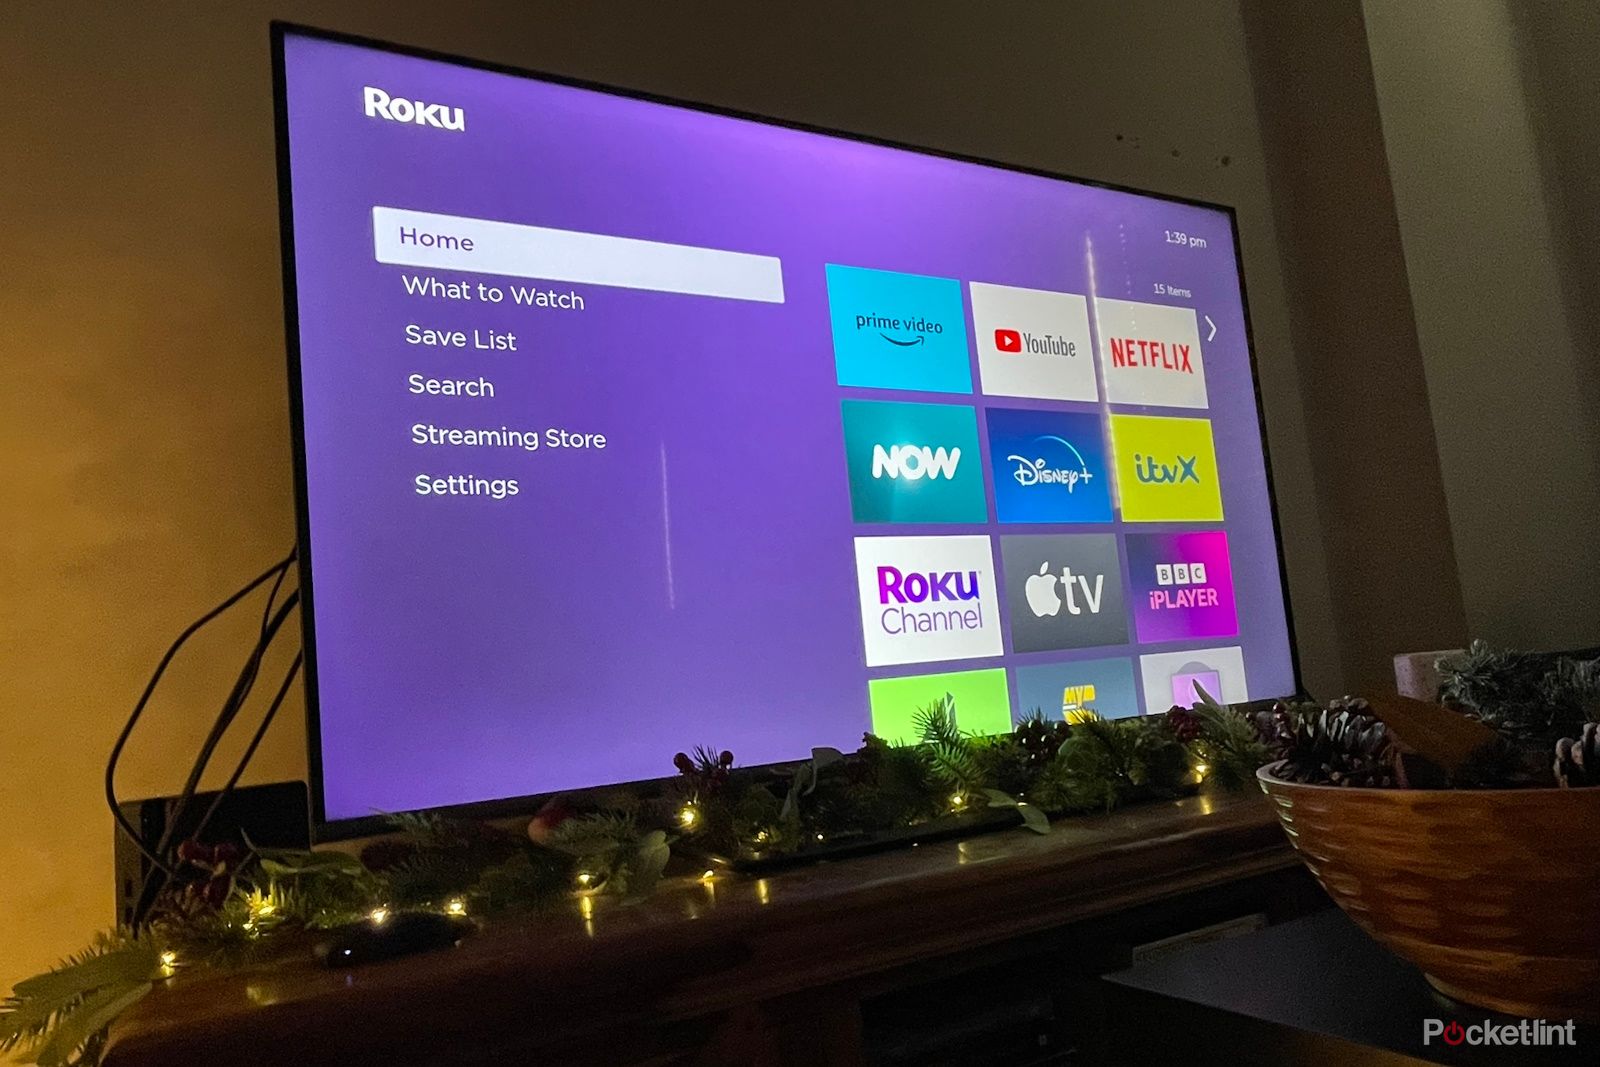 Roku device plugged into TV on home screen